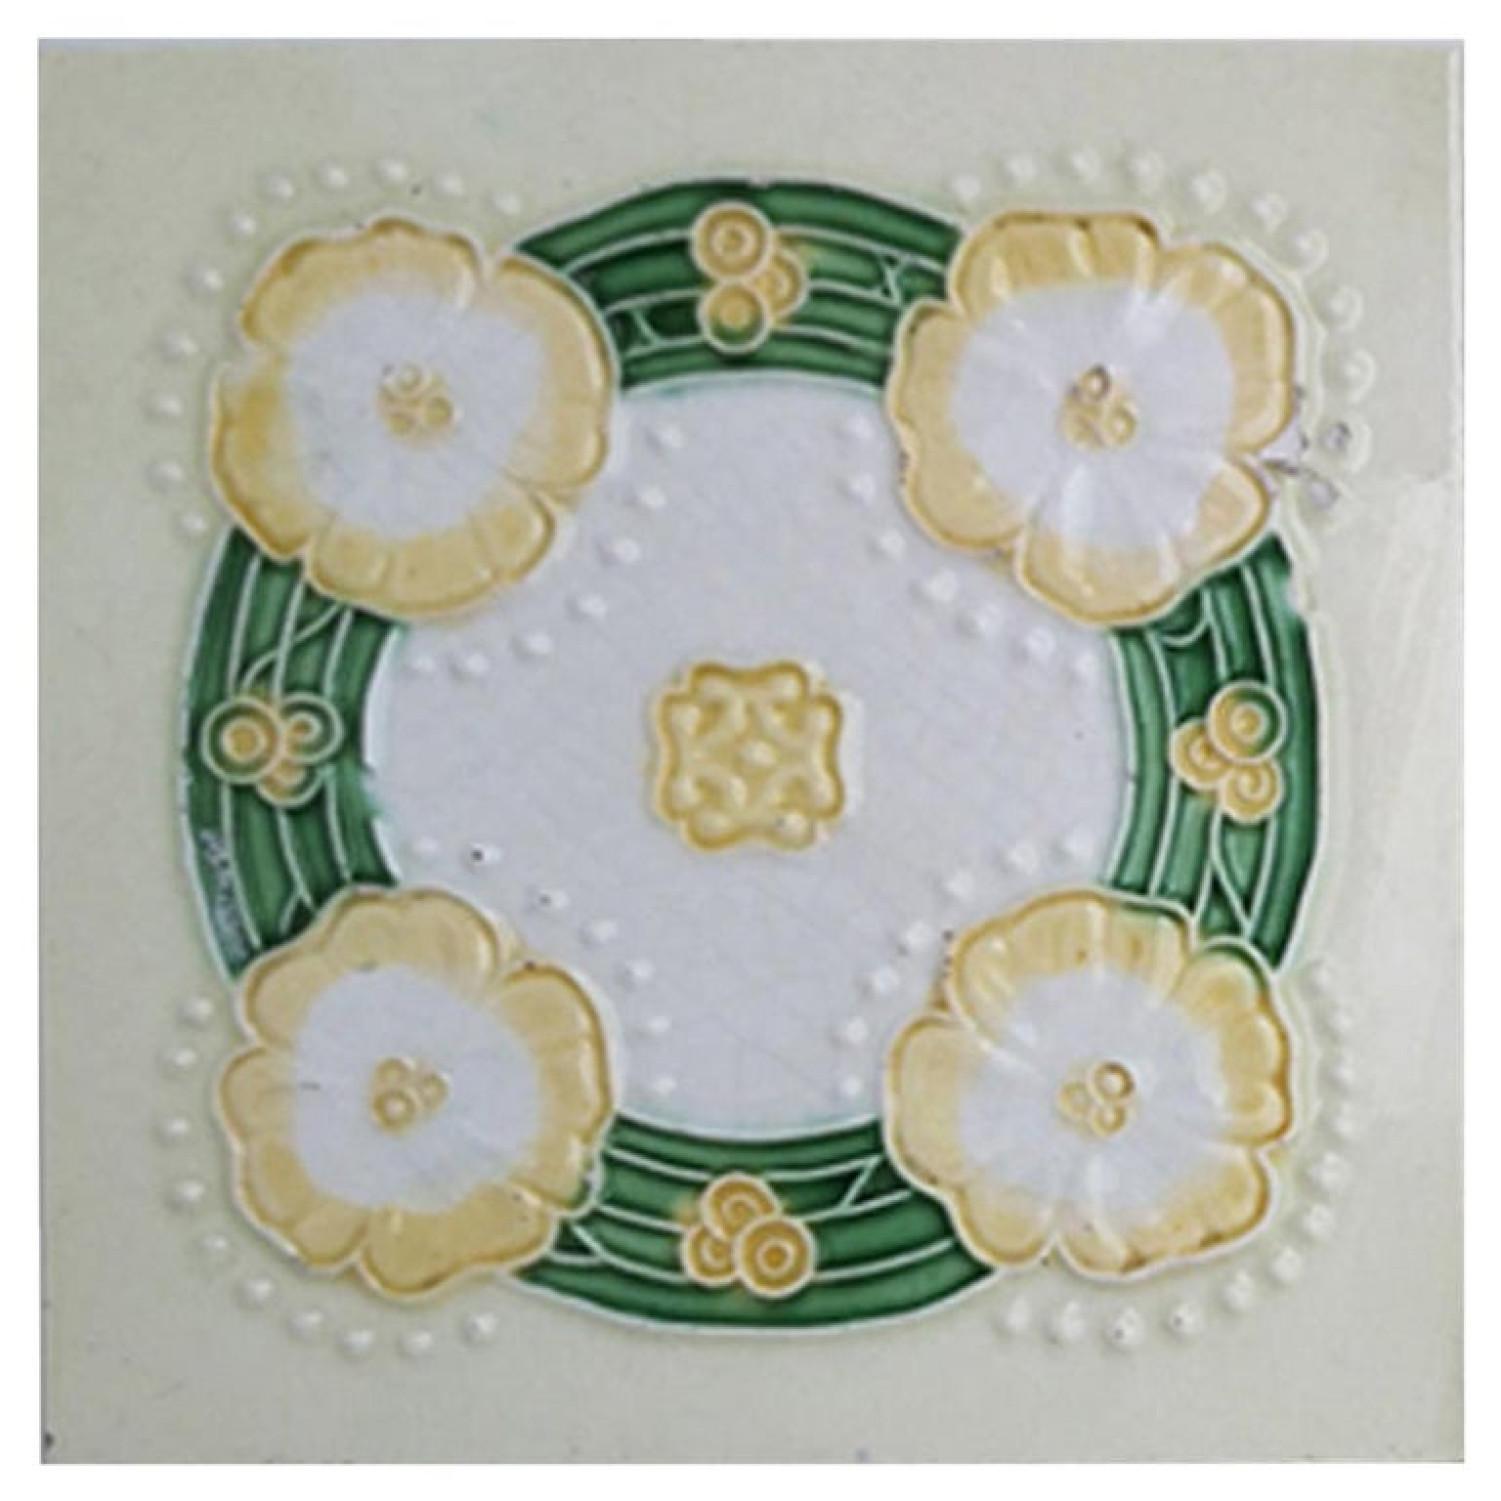 1 of the 28 unique and antique set of Art Nouveau handmade glazed relief tiles. Manufactured by NV Cermamiek produkten De Dijle (Belga), around 1930. A beautiful relief and color. and a wonderful design. These tiles would be charming displayed on